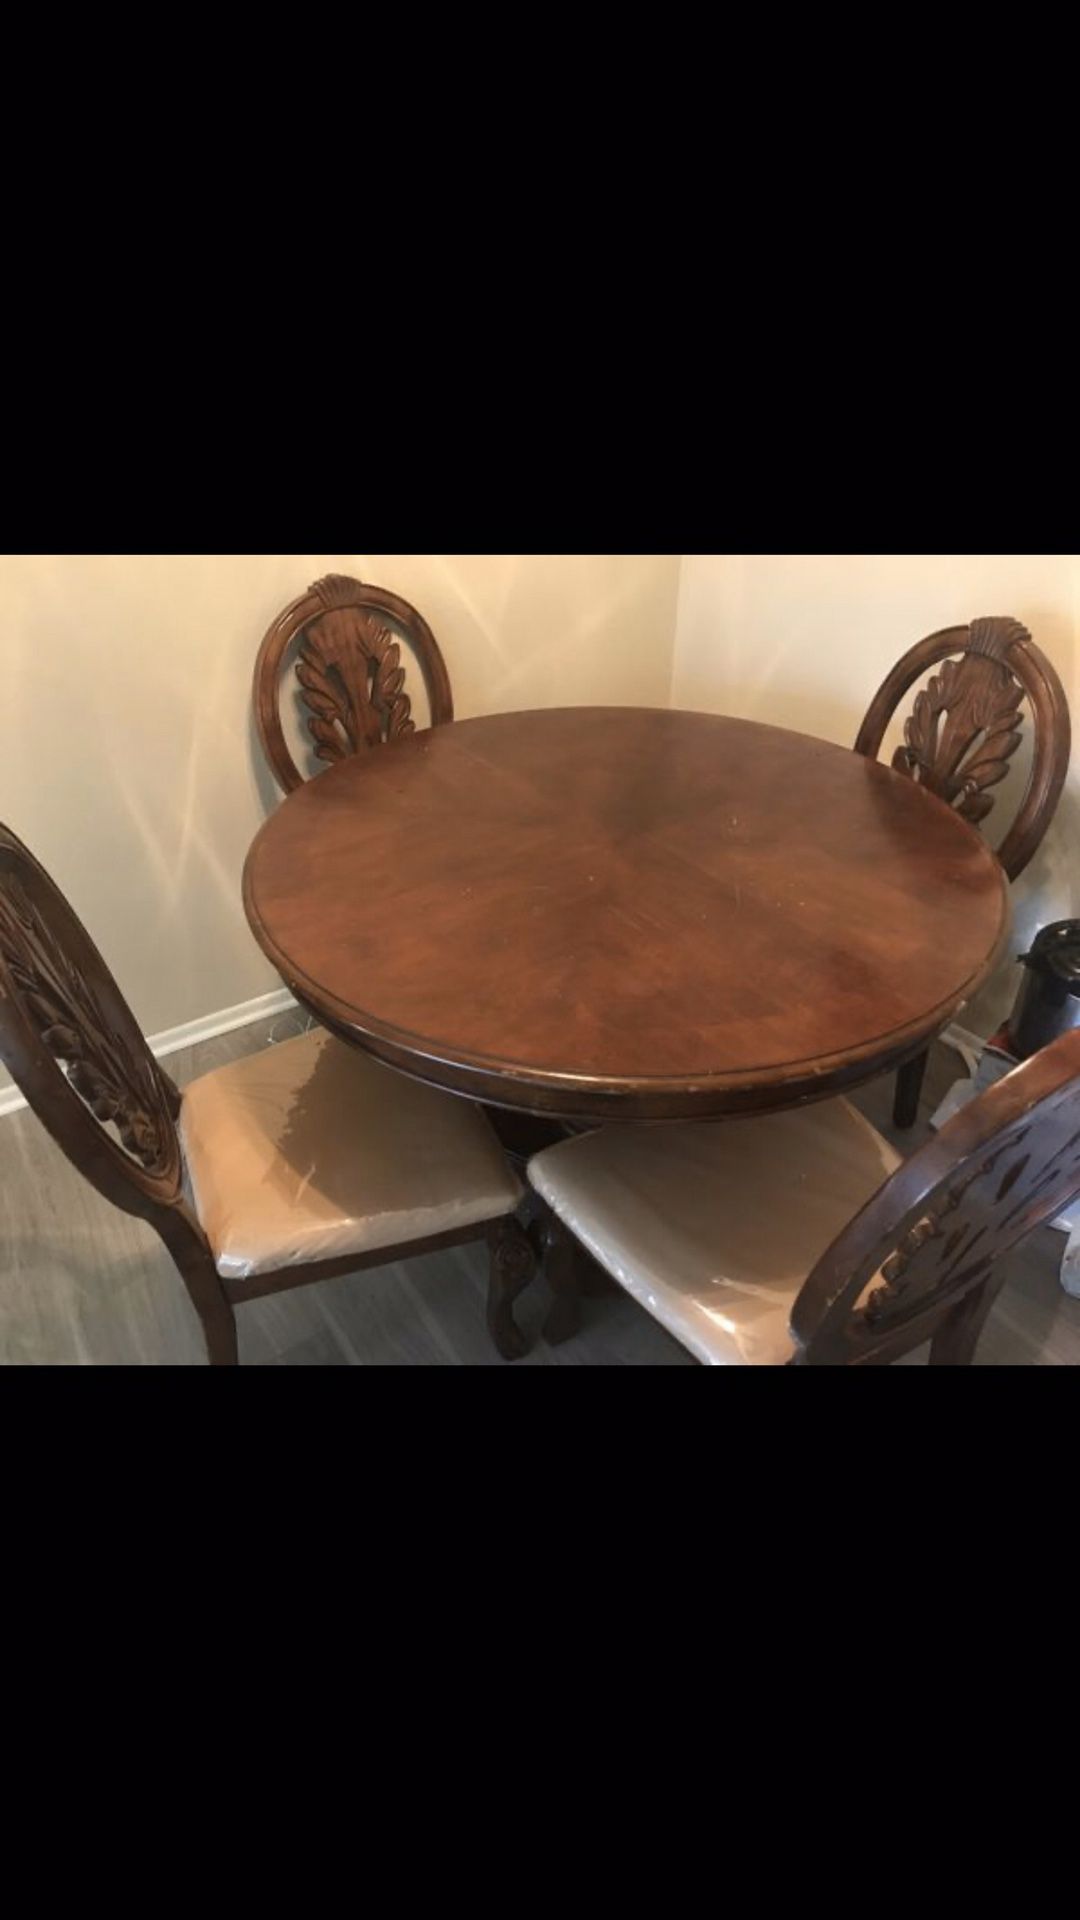 Wooden table 4 chairs $60 Obo